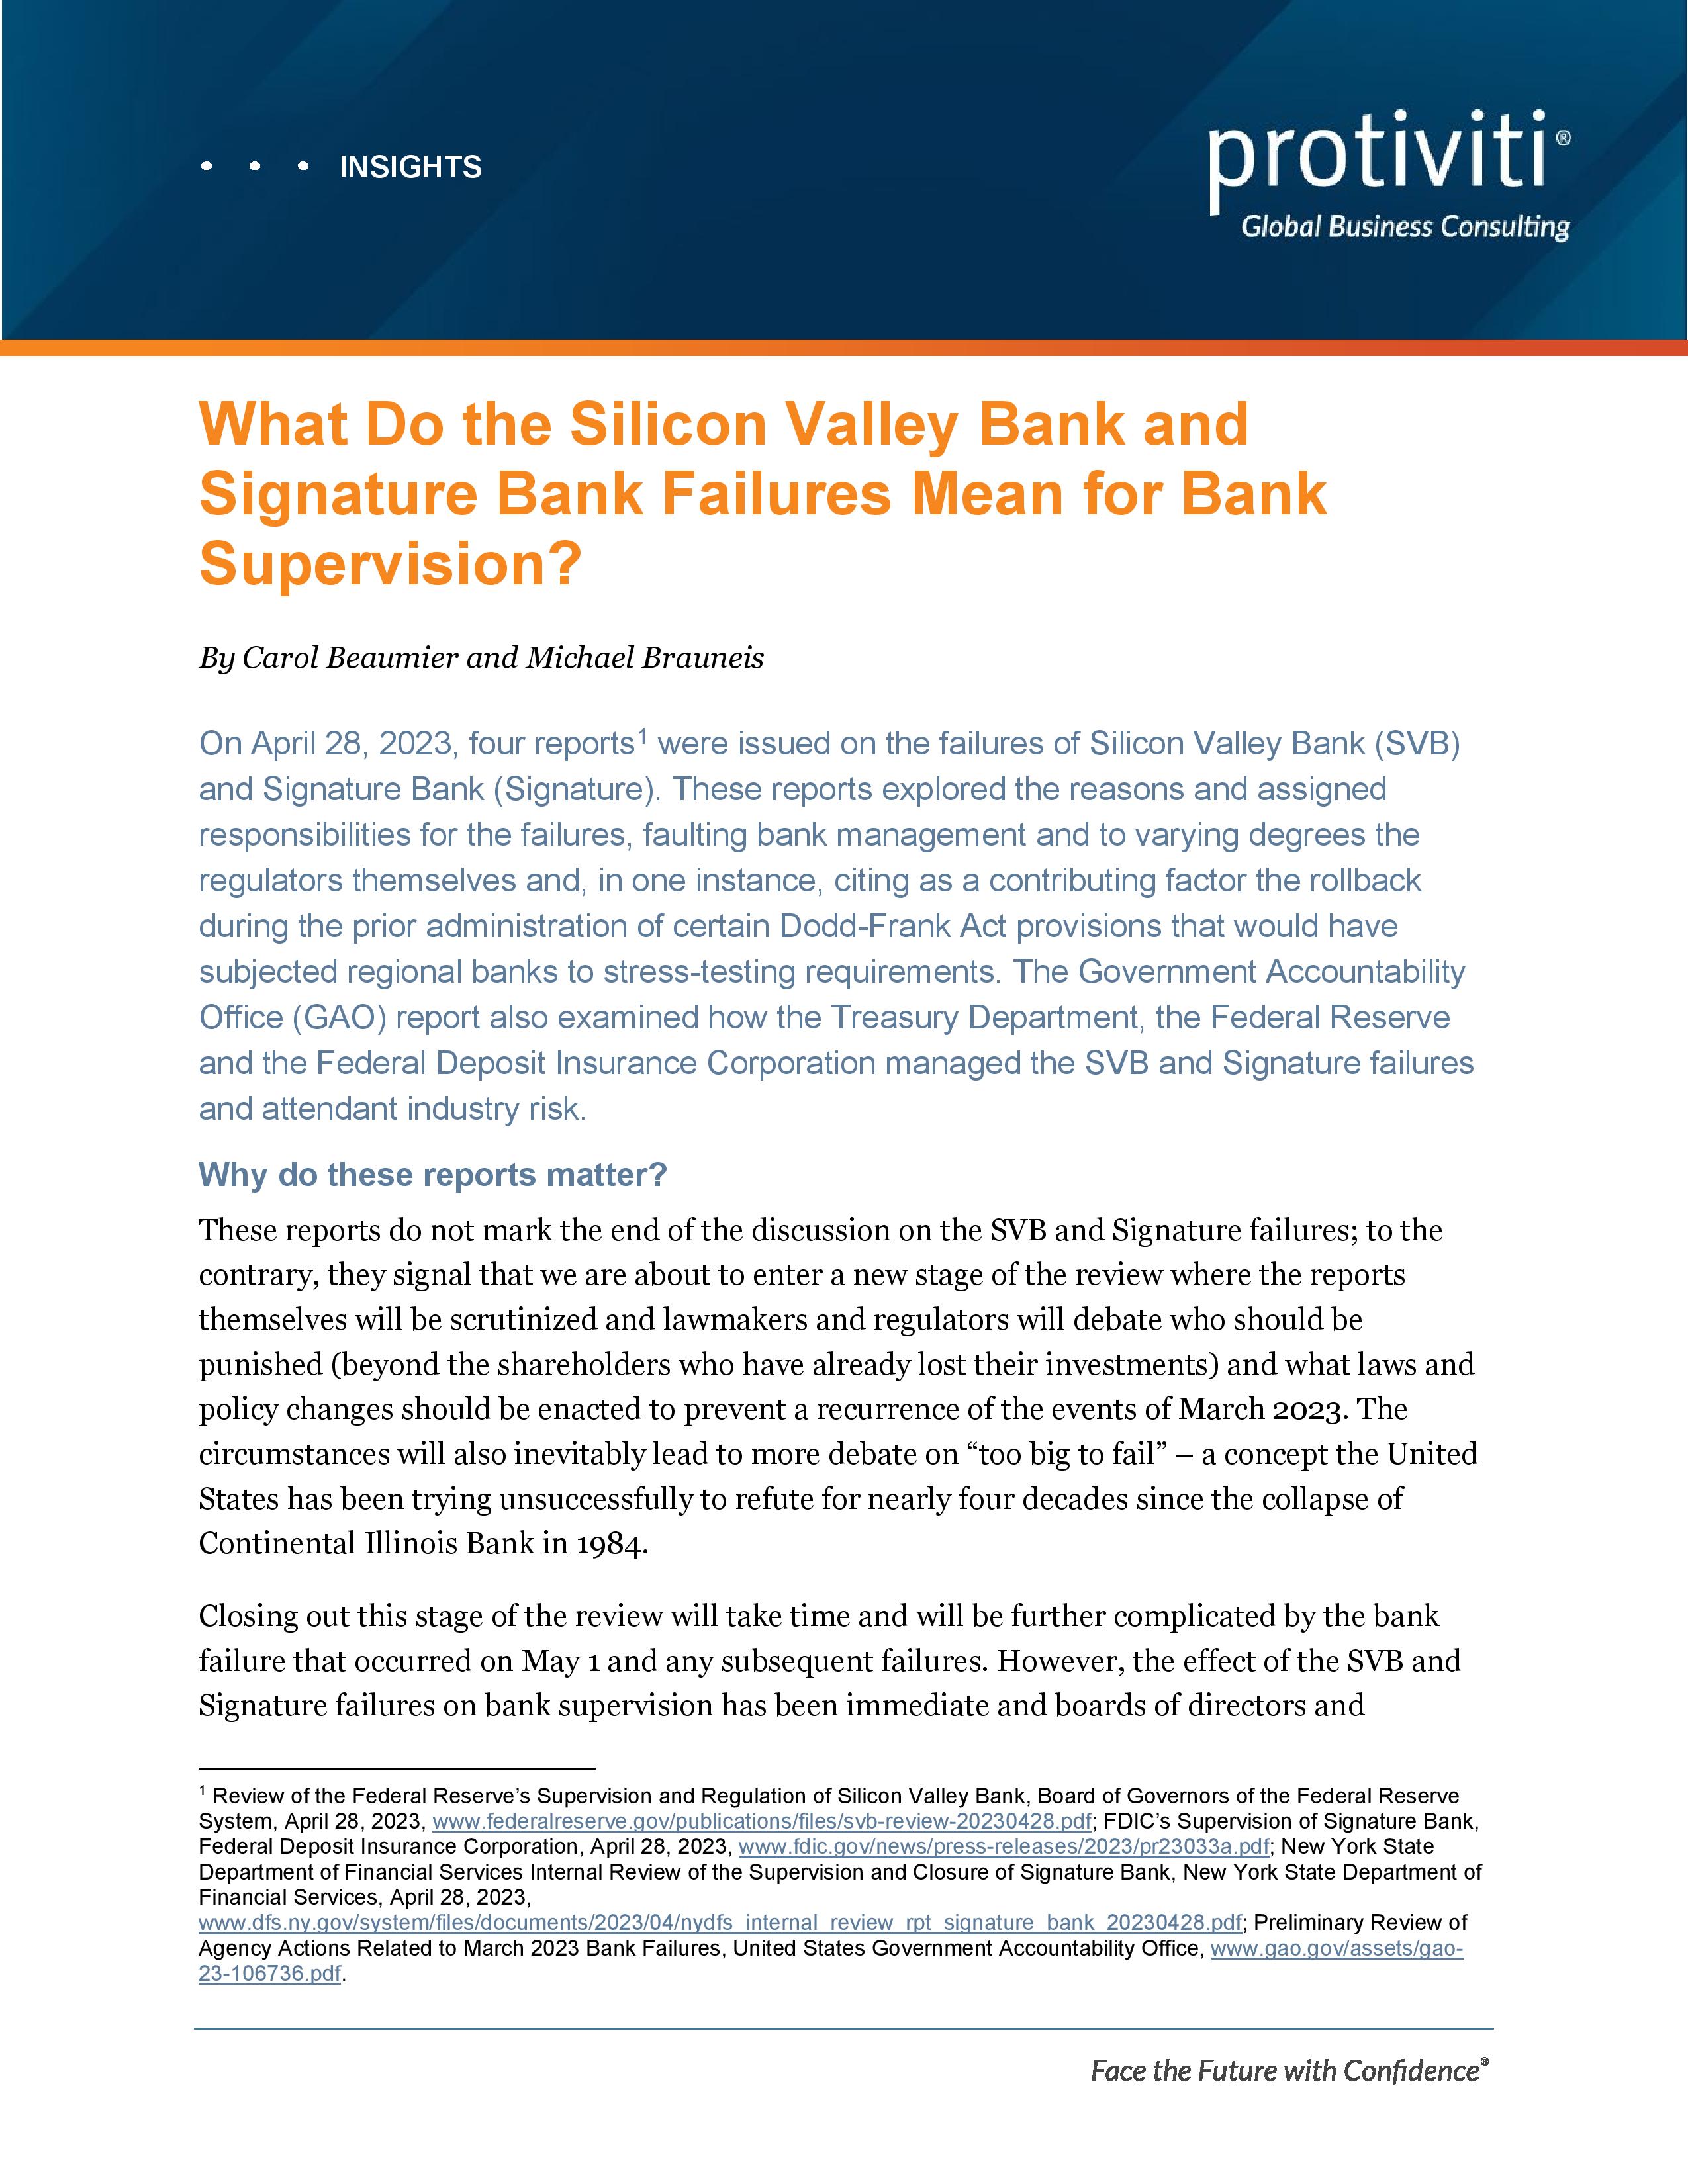 Screenshot of the first page of What Do the Silicon Valley Bank and Signature Bank Failures Mean for Bank Supervision